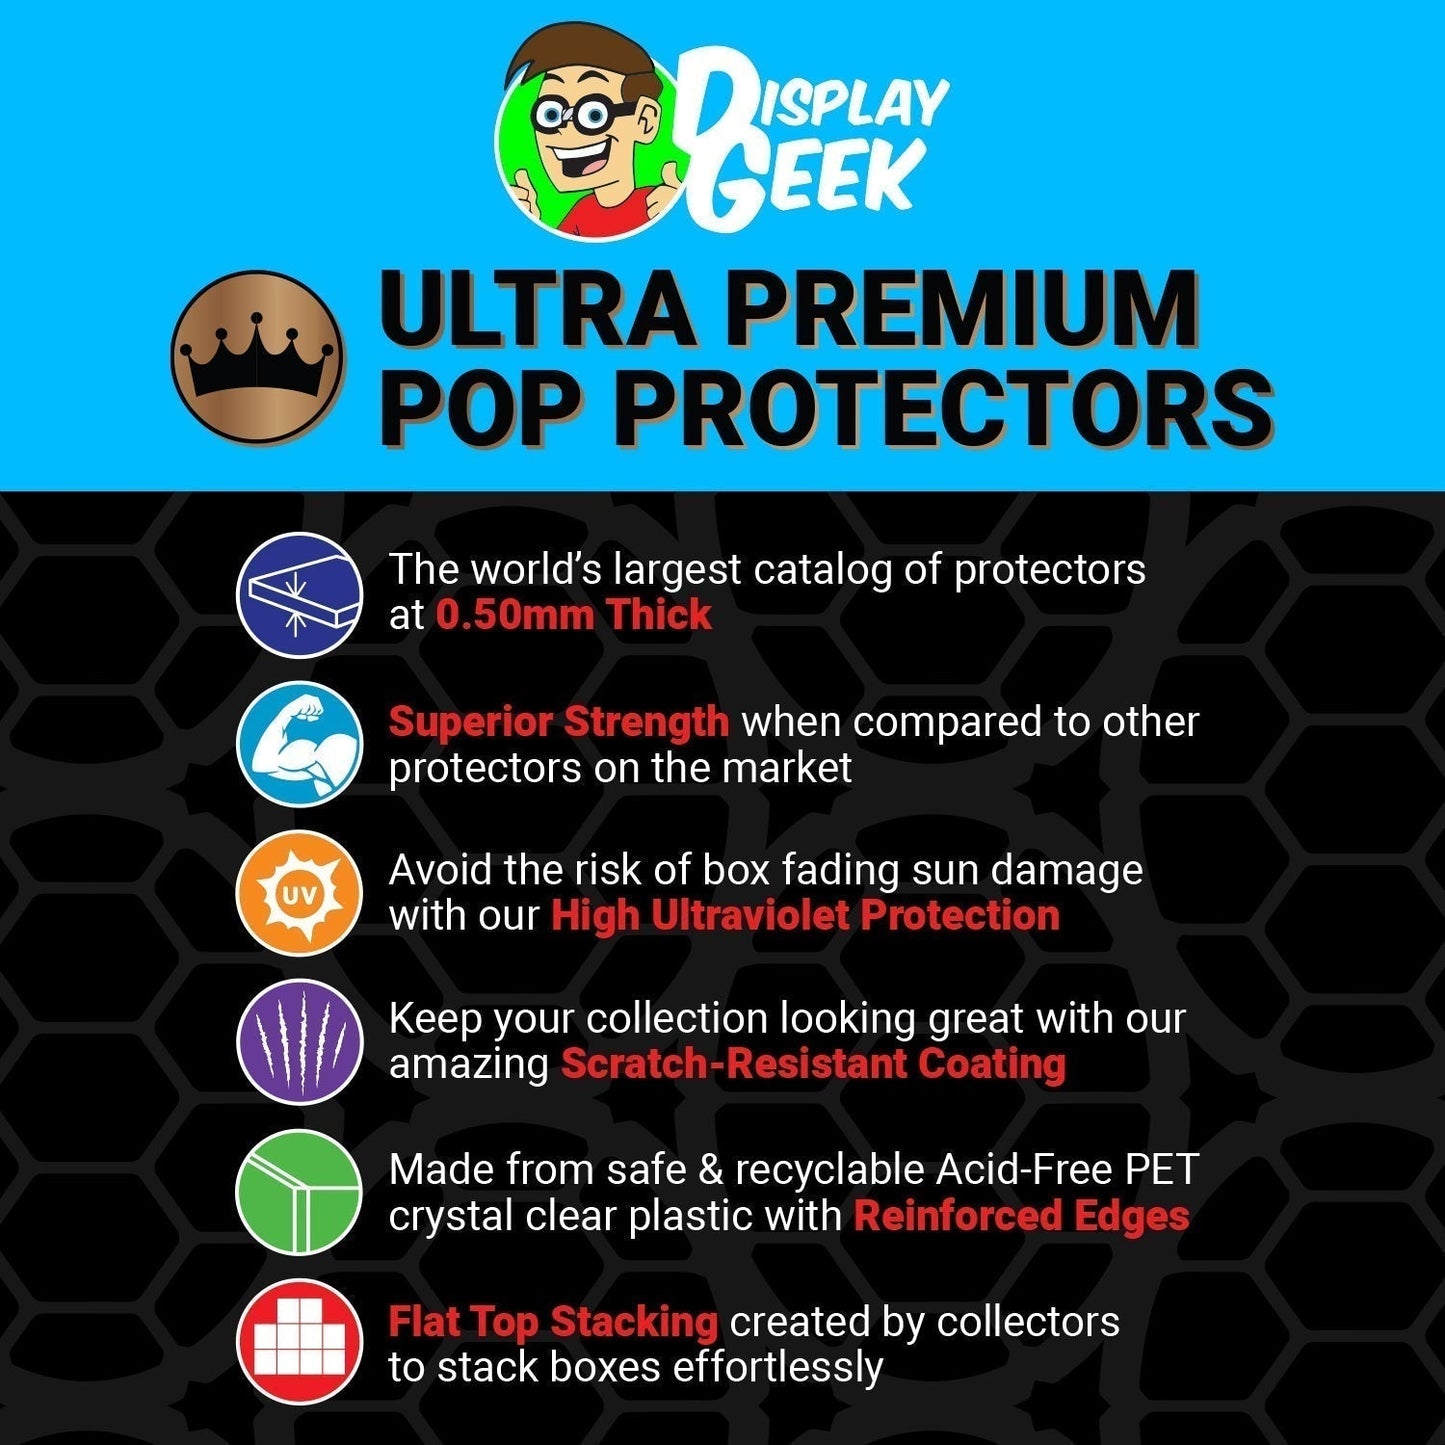 Pop Protector for Dead Strange & The Scarlet Witch #1027 Funko Pop Moment - PPG Pop Protector Guide Search Created by Display Geek